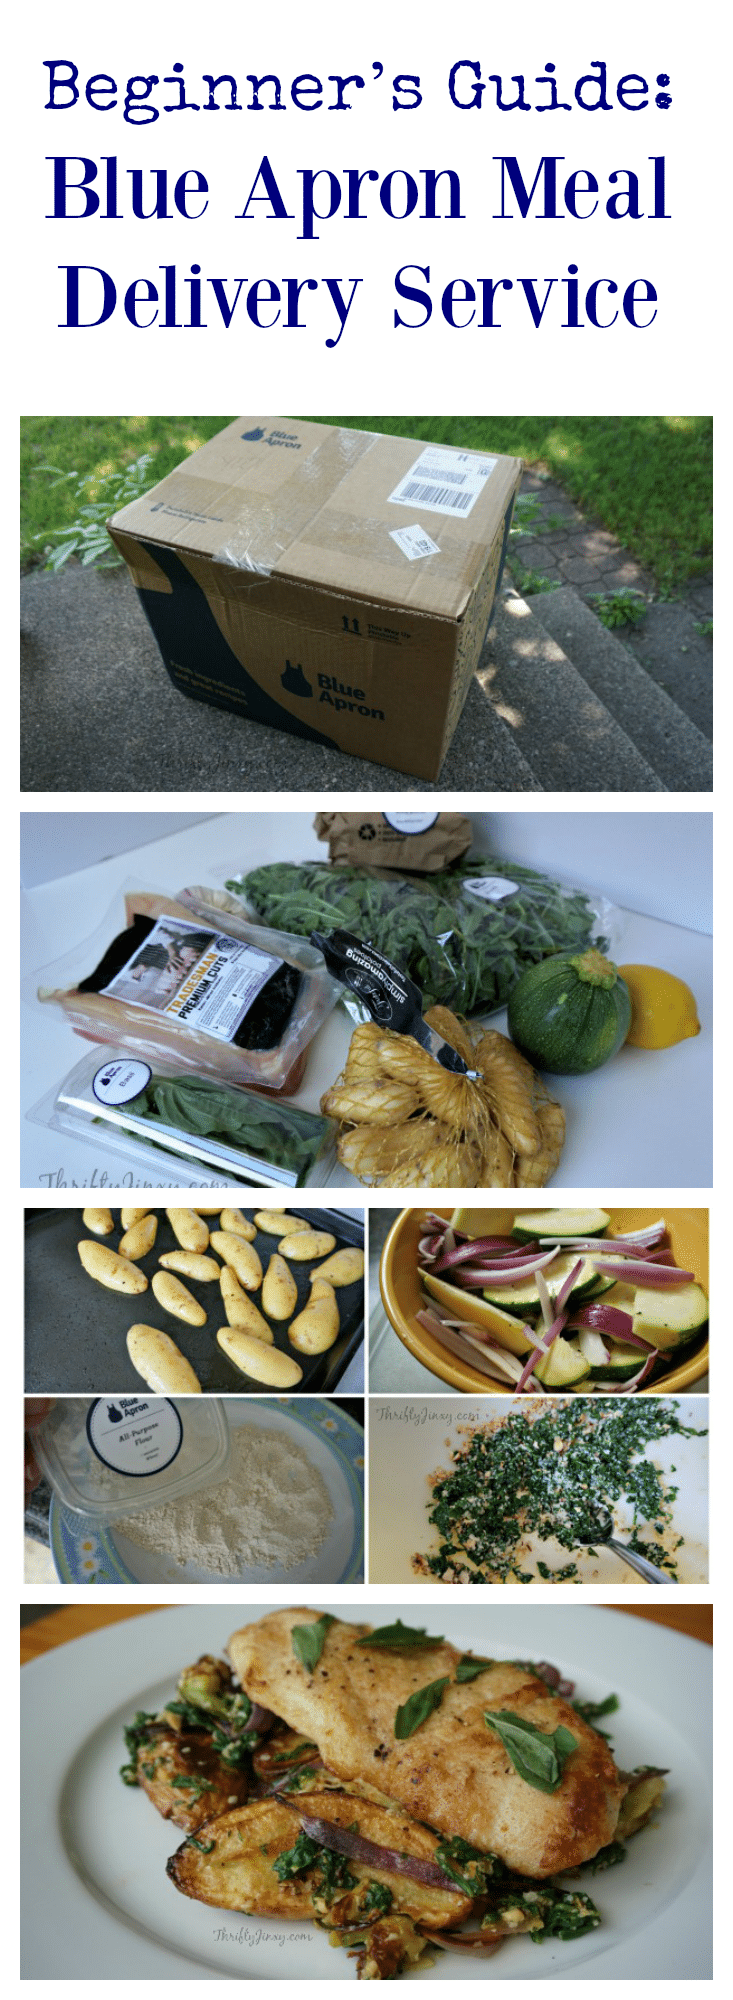 Beginner’s Guide Blue Apron Meal Delivery Service